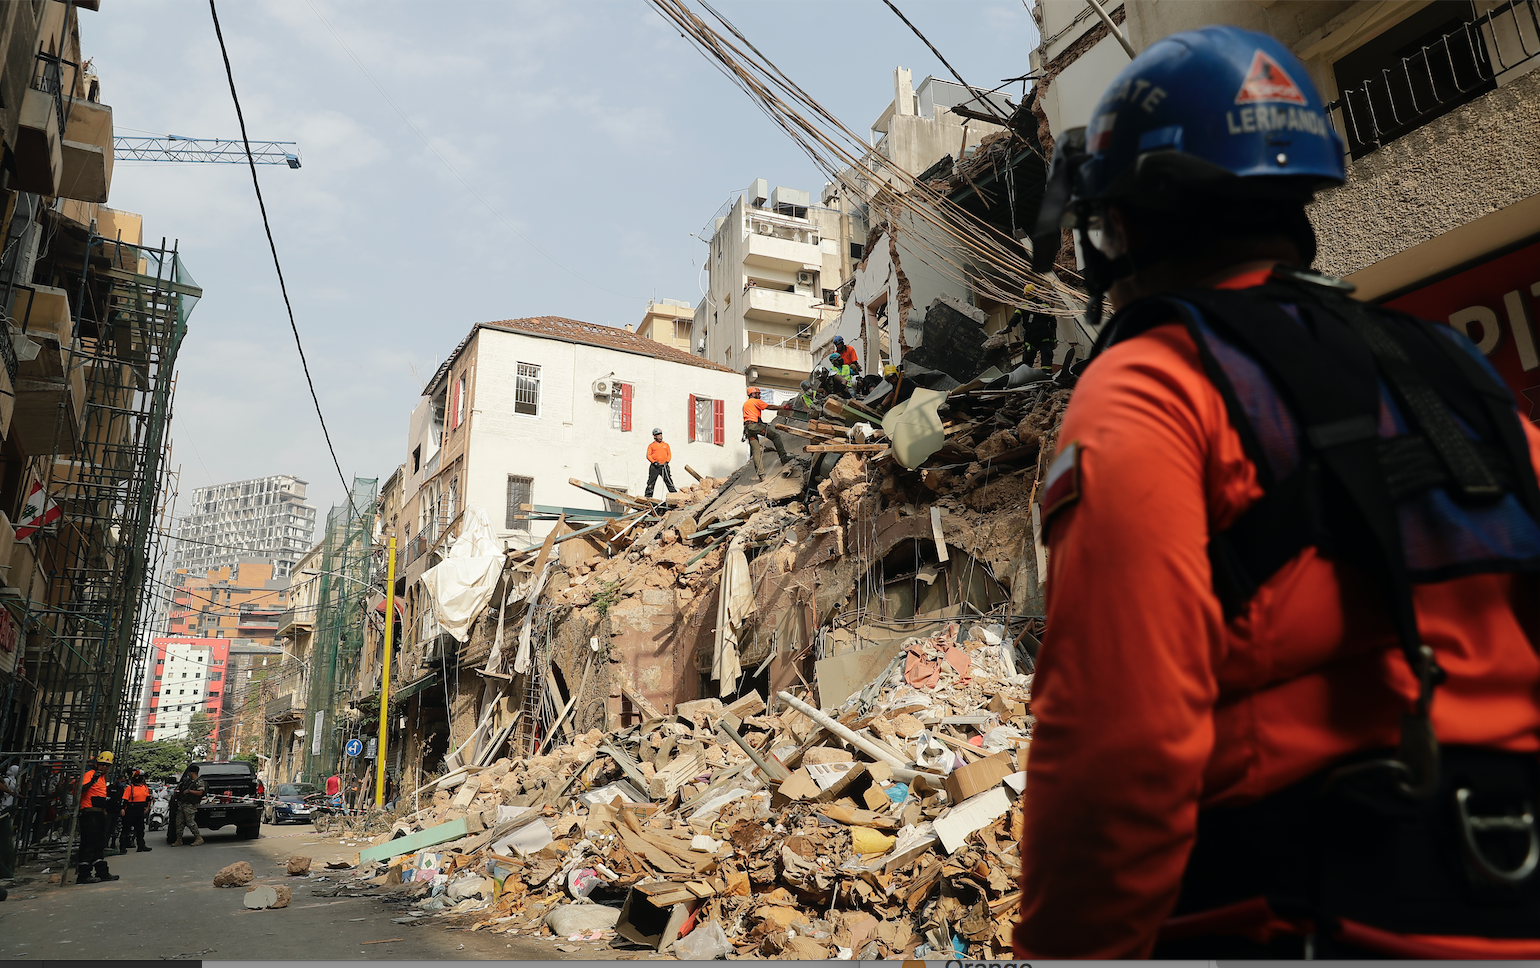 Rescue workers dig through the rubble of a badly damaged building in Lebanon's capital, Beirut, in search of possible survivors from a mega-blast at the adjacent port one month ago, after scanners detected a pulse, on September 3, 2020. A sniffer dog used by Chilean rescuers responded to a scent from the site of a collapsed building in the Gemmayzeh area, the city's governor told reporters at the scene. Image by Joseph Eid/AFP. Lebanon, 2020.